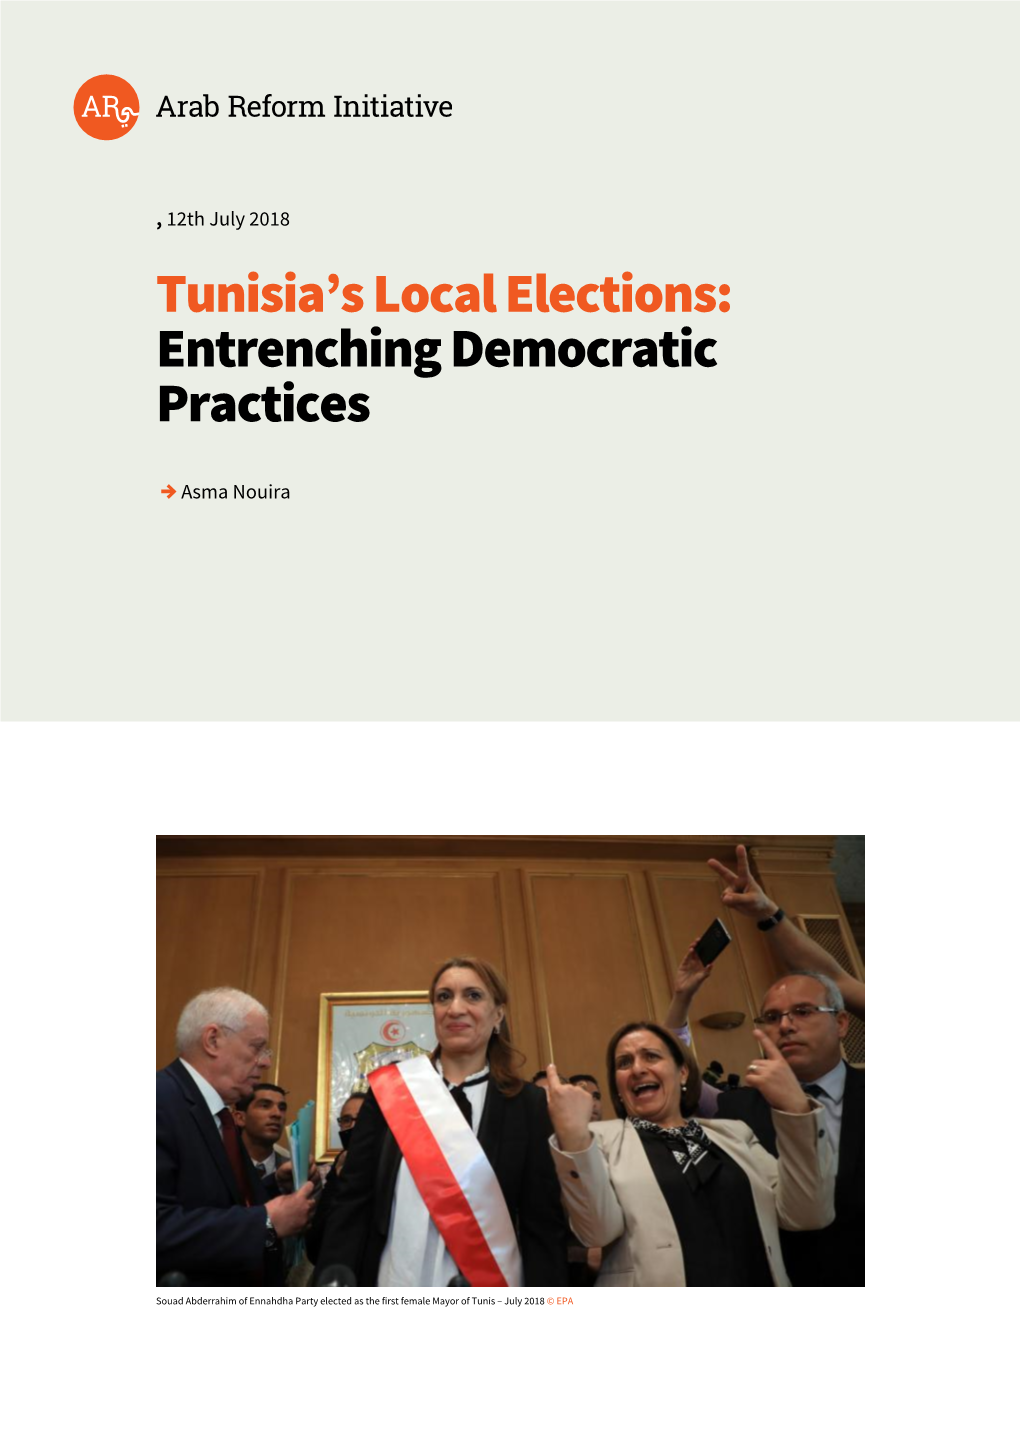 Tunisia's Local Elections: Entrenching Democratic Practices